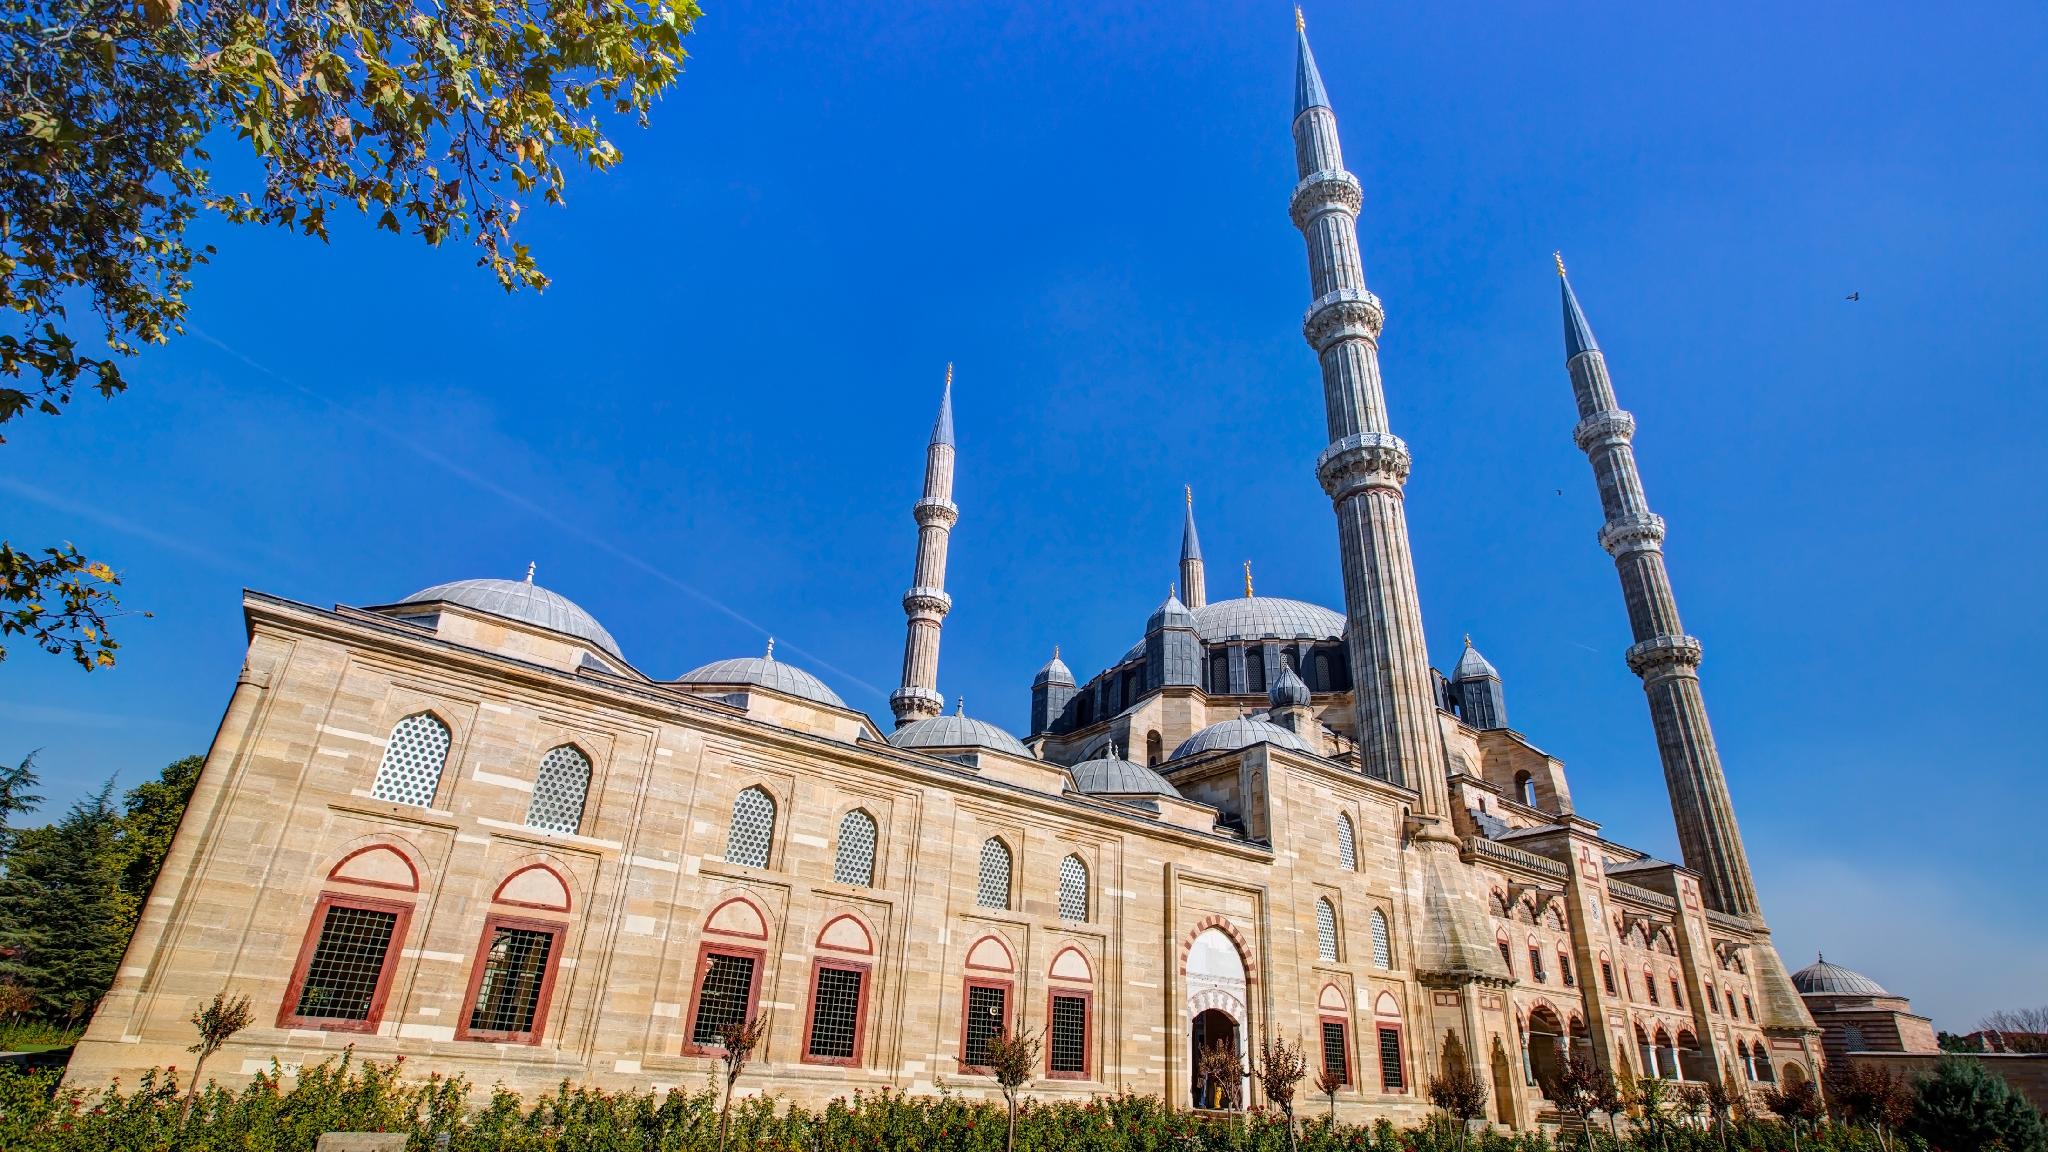 DAILY EDIRNE SMALL GROUP TOUR